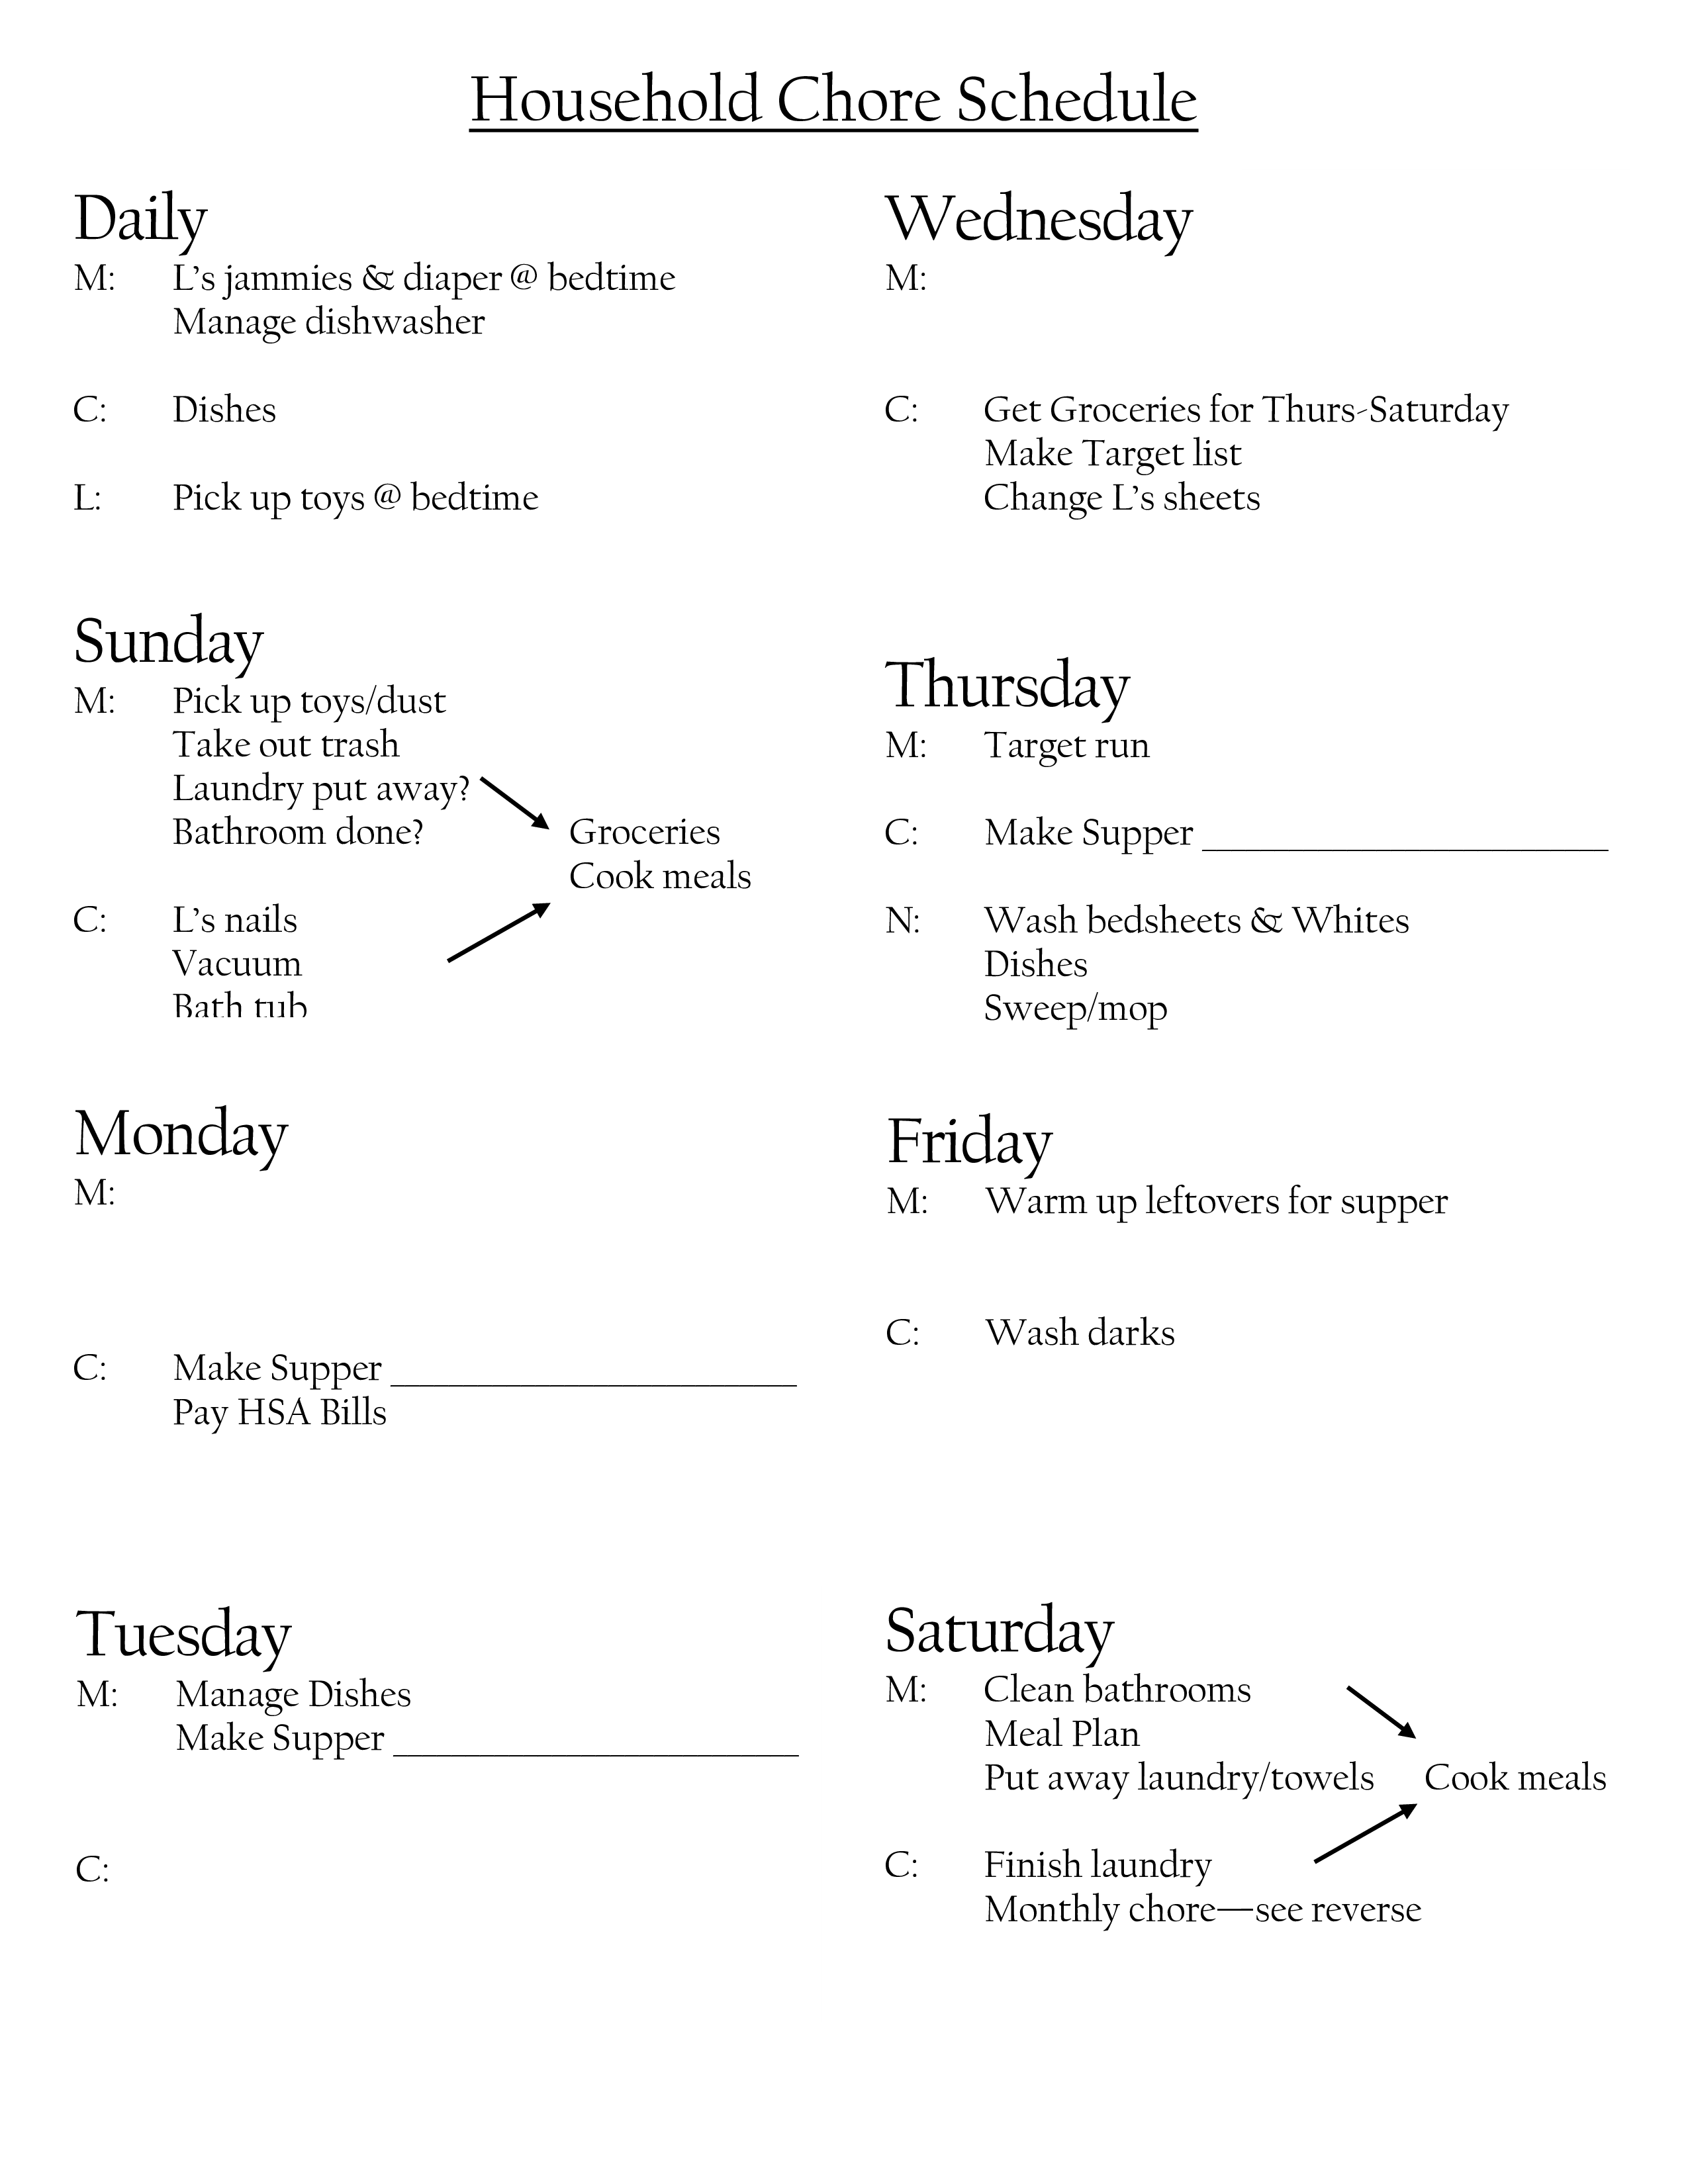 Household Chore Schedule main image